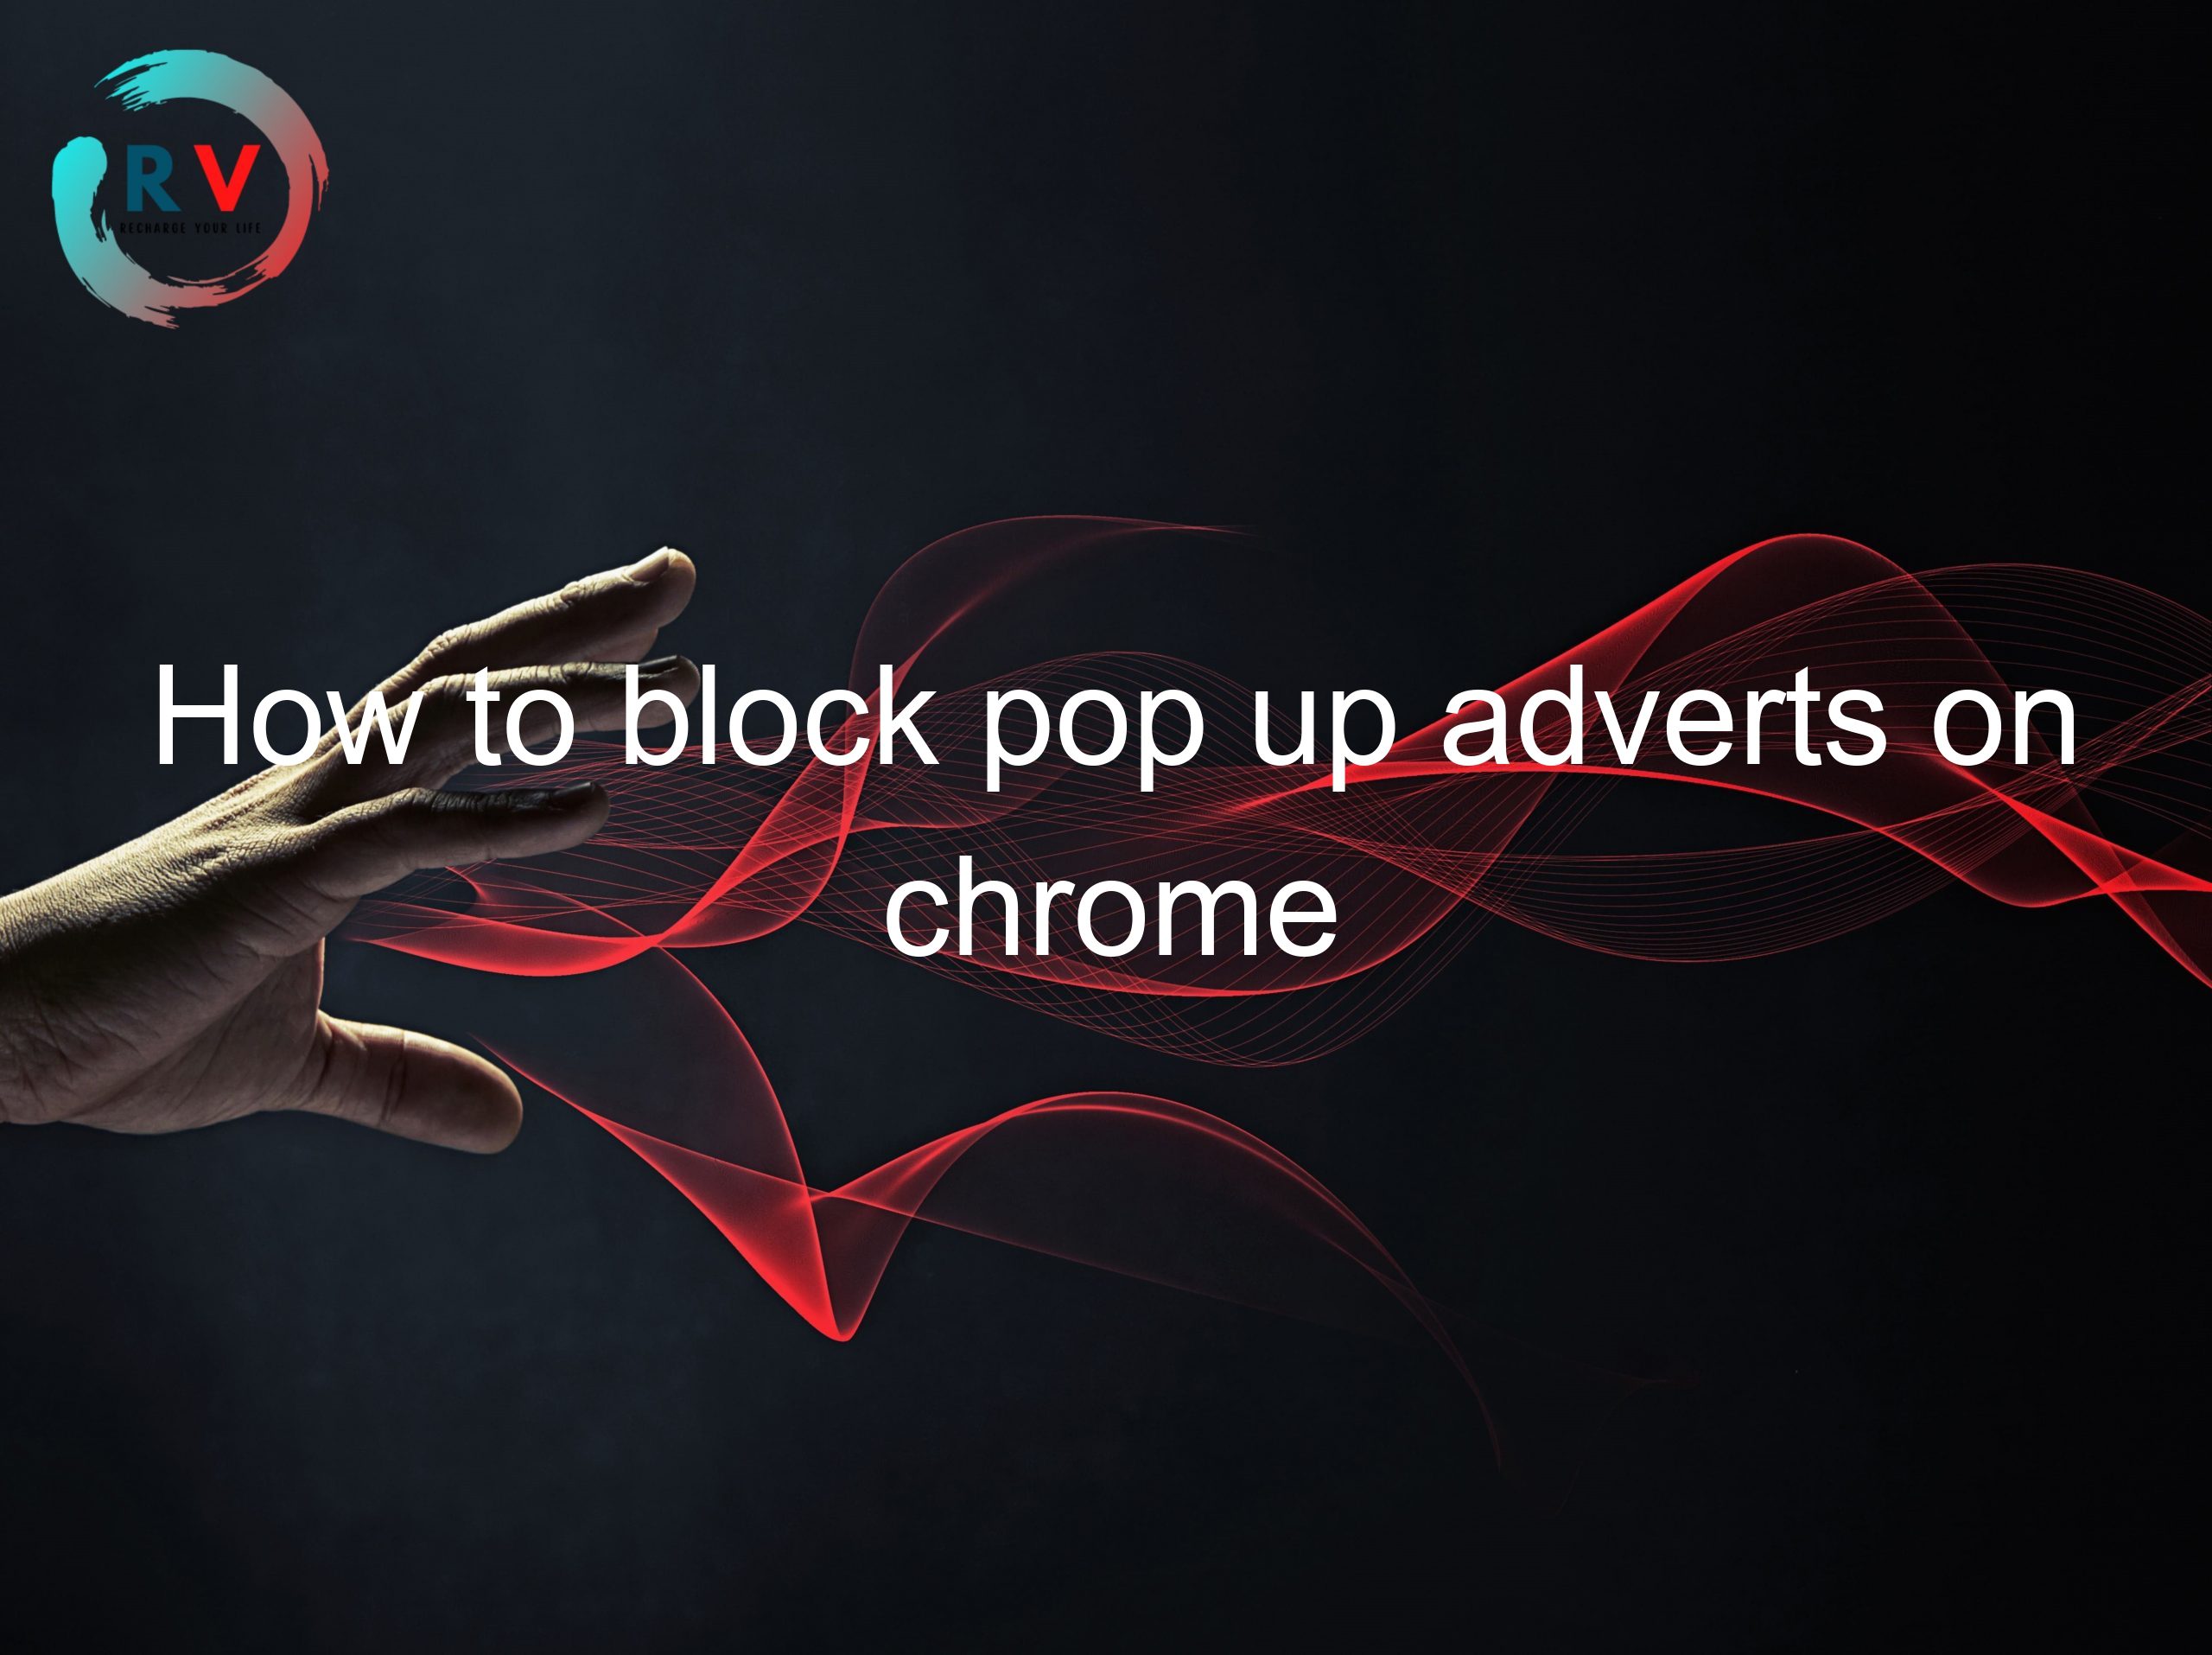 How to block pop up adverts on chrome